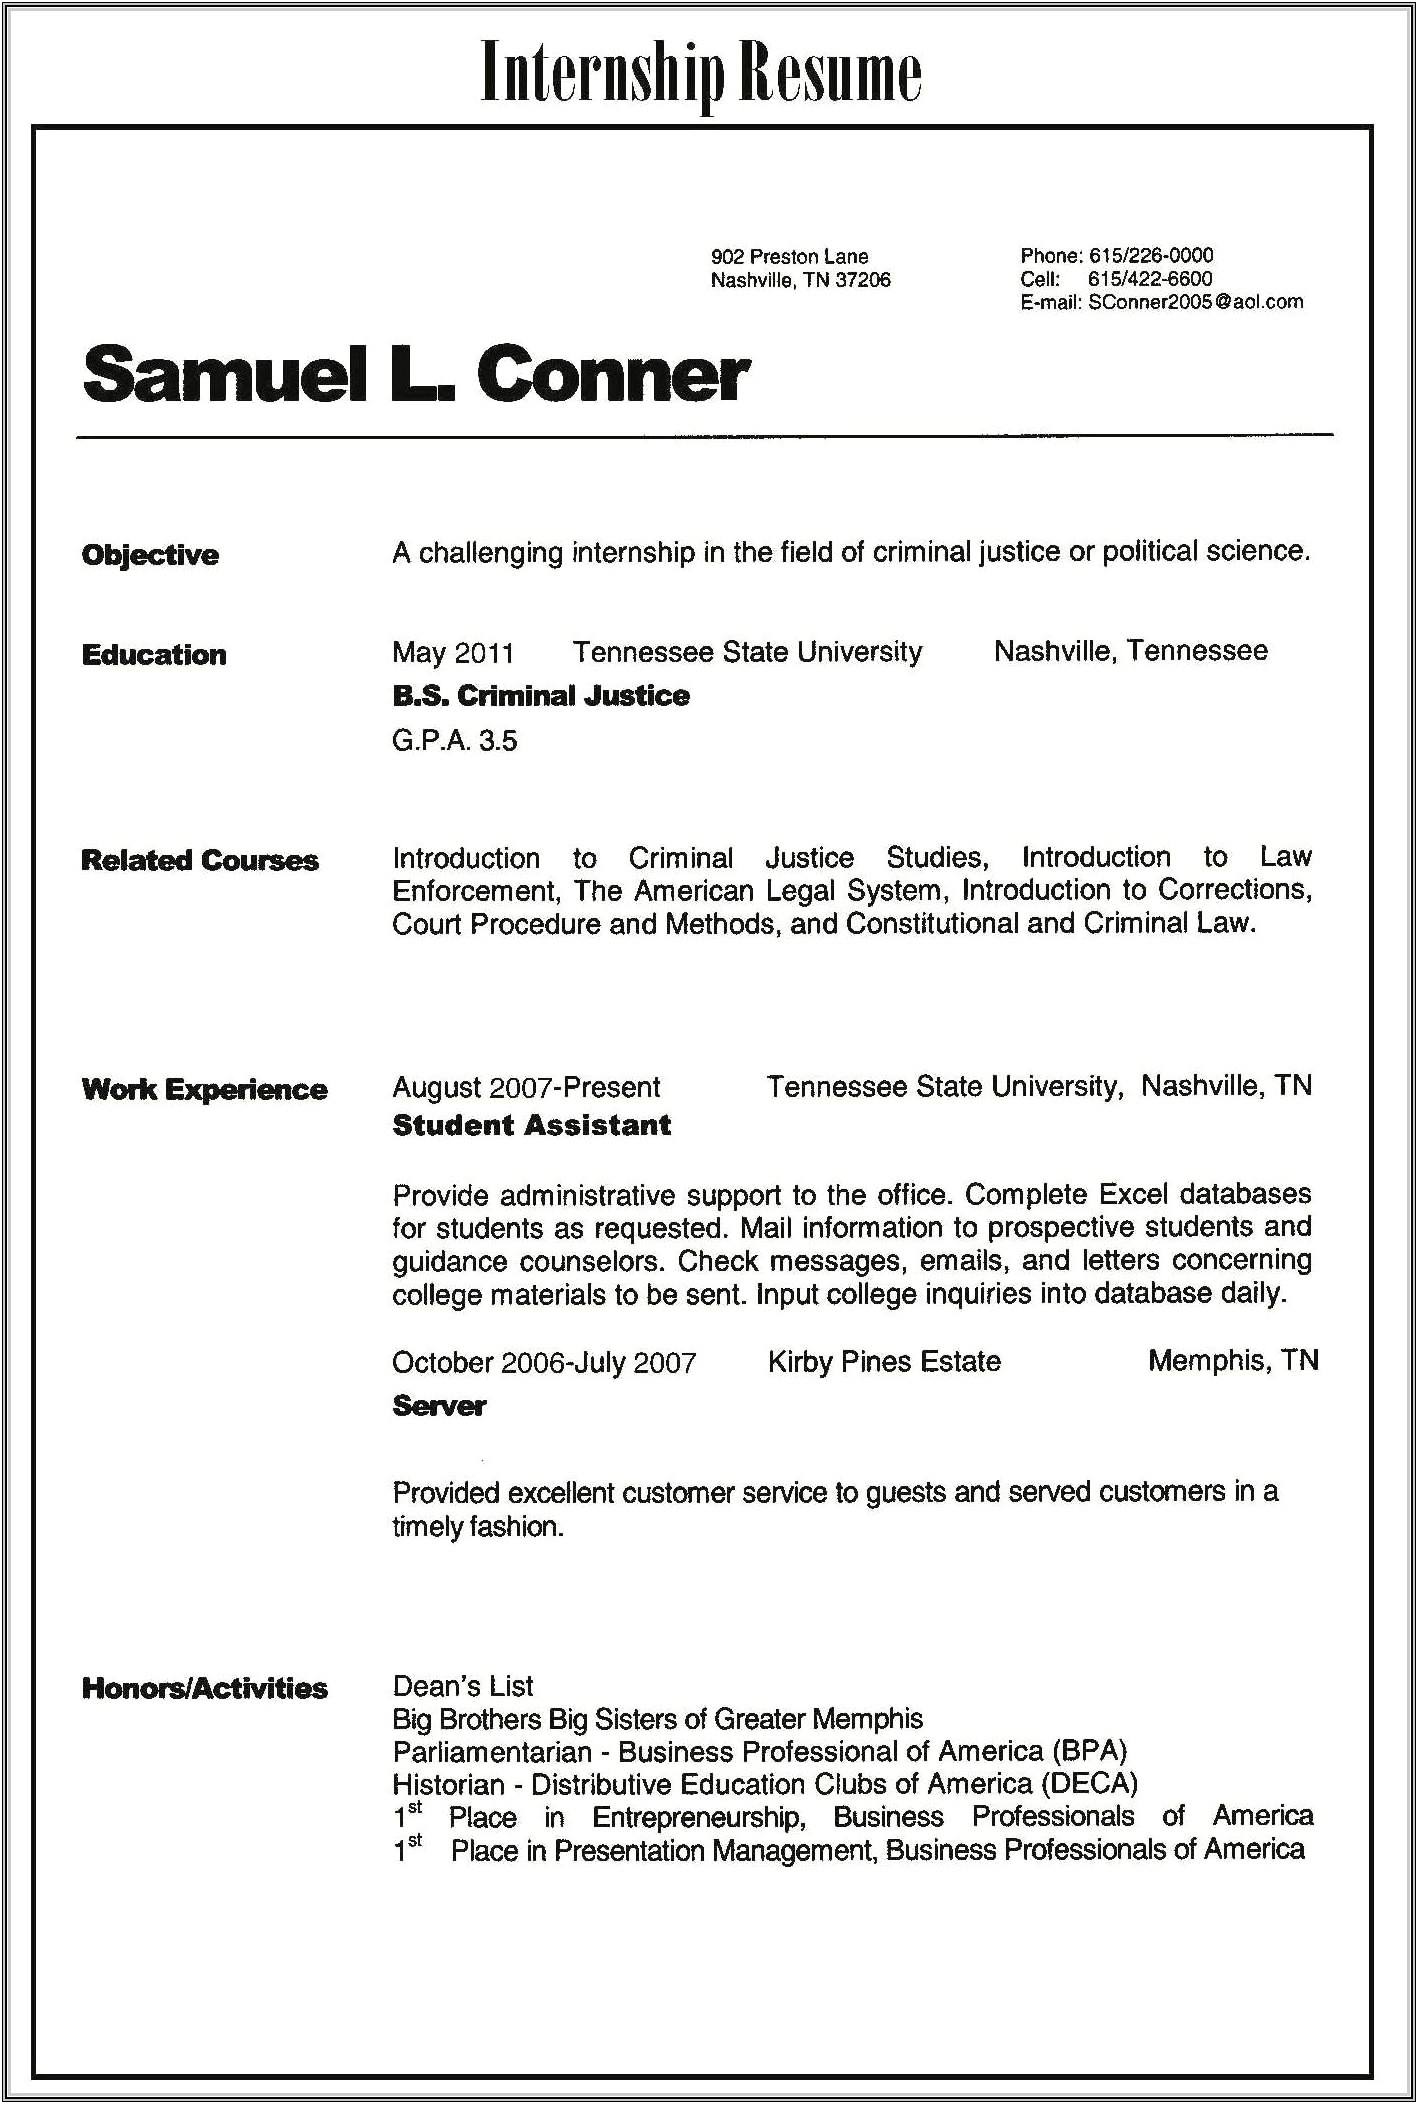 Resume Examples Education Criminal Justice